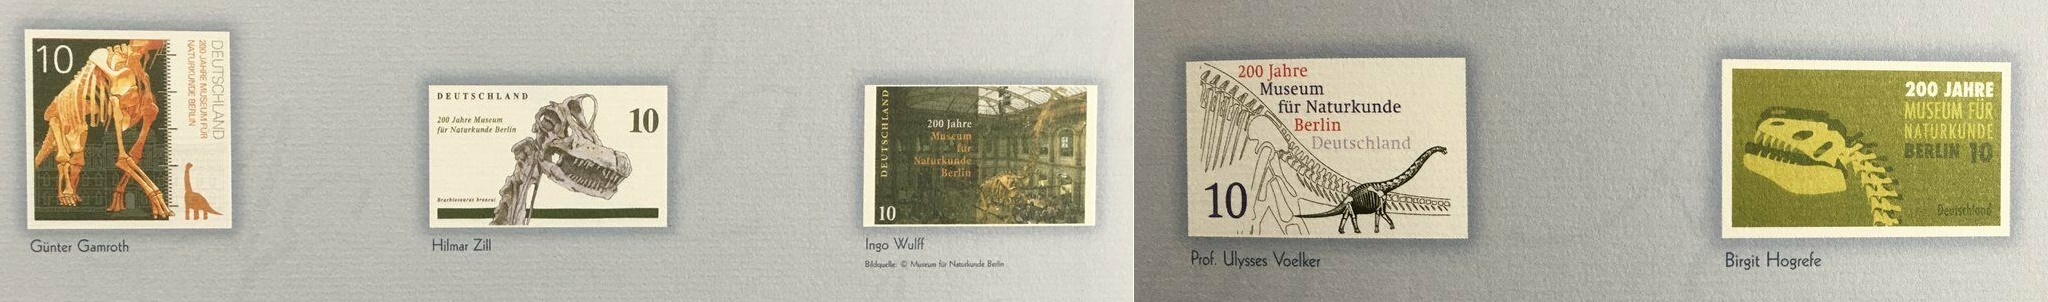 draft of Bicentenary of Museum fuer Naturkunde in Berlin stamp of Germany 2010